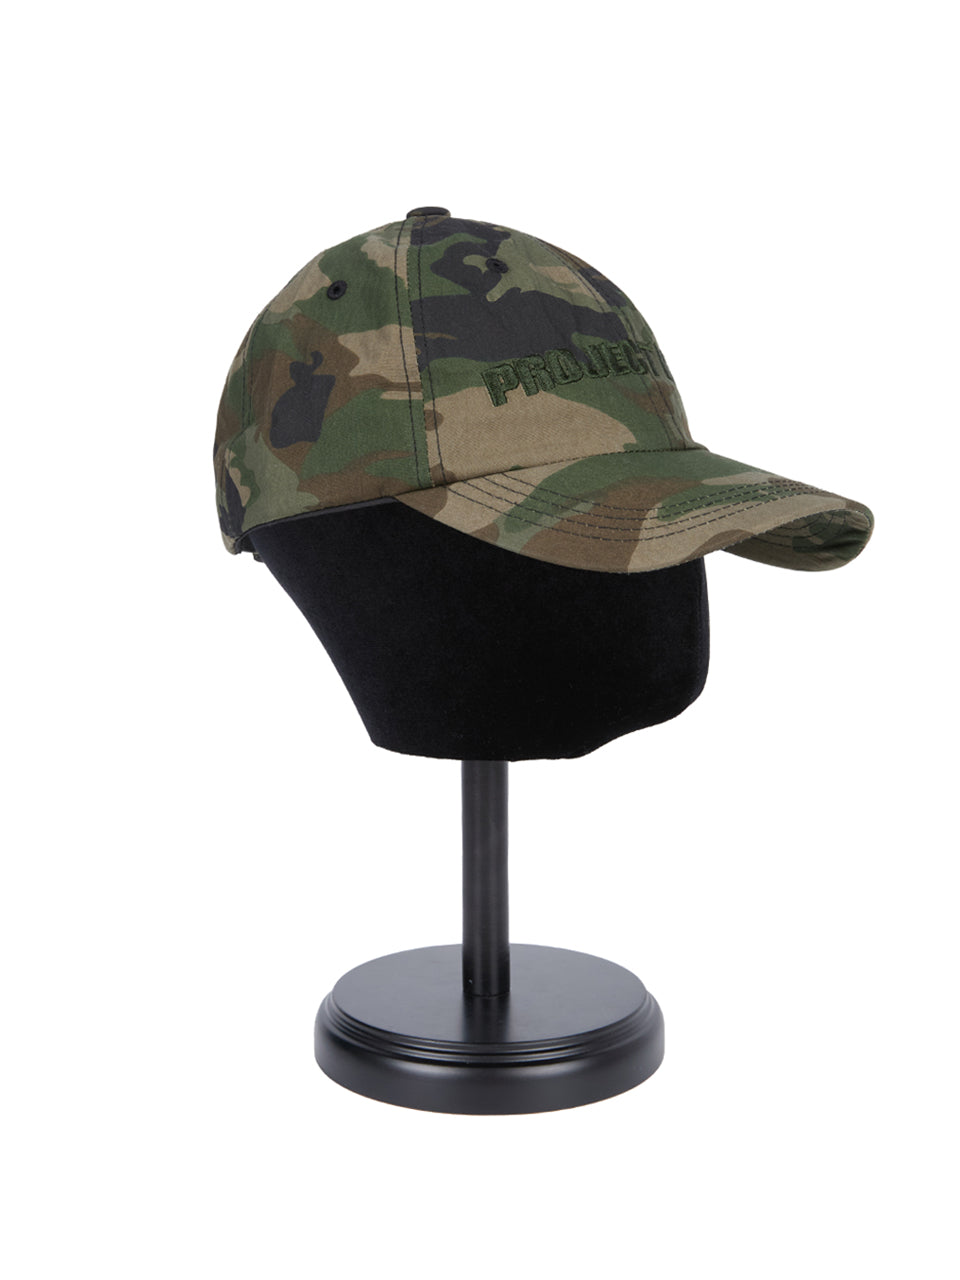 AC-778 Camouflage Texted Ball Cap